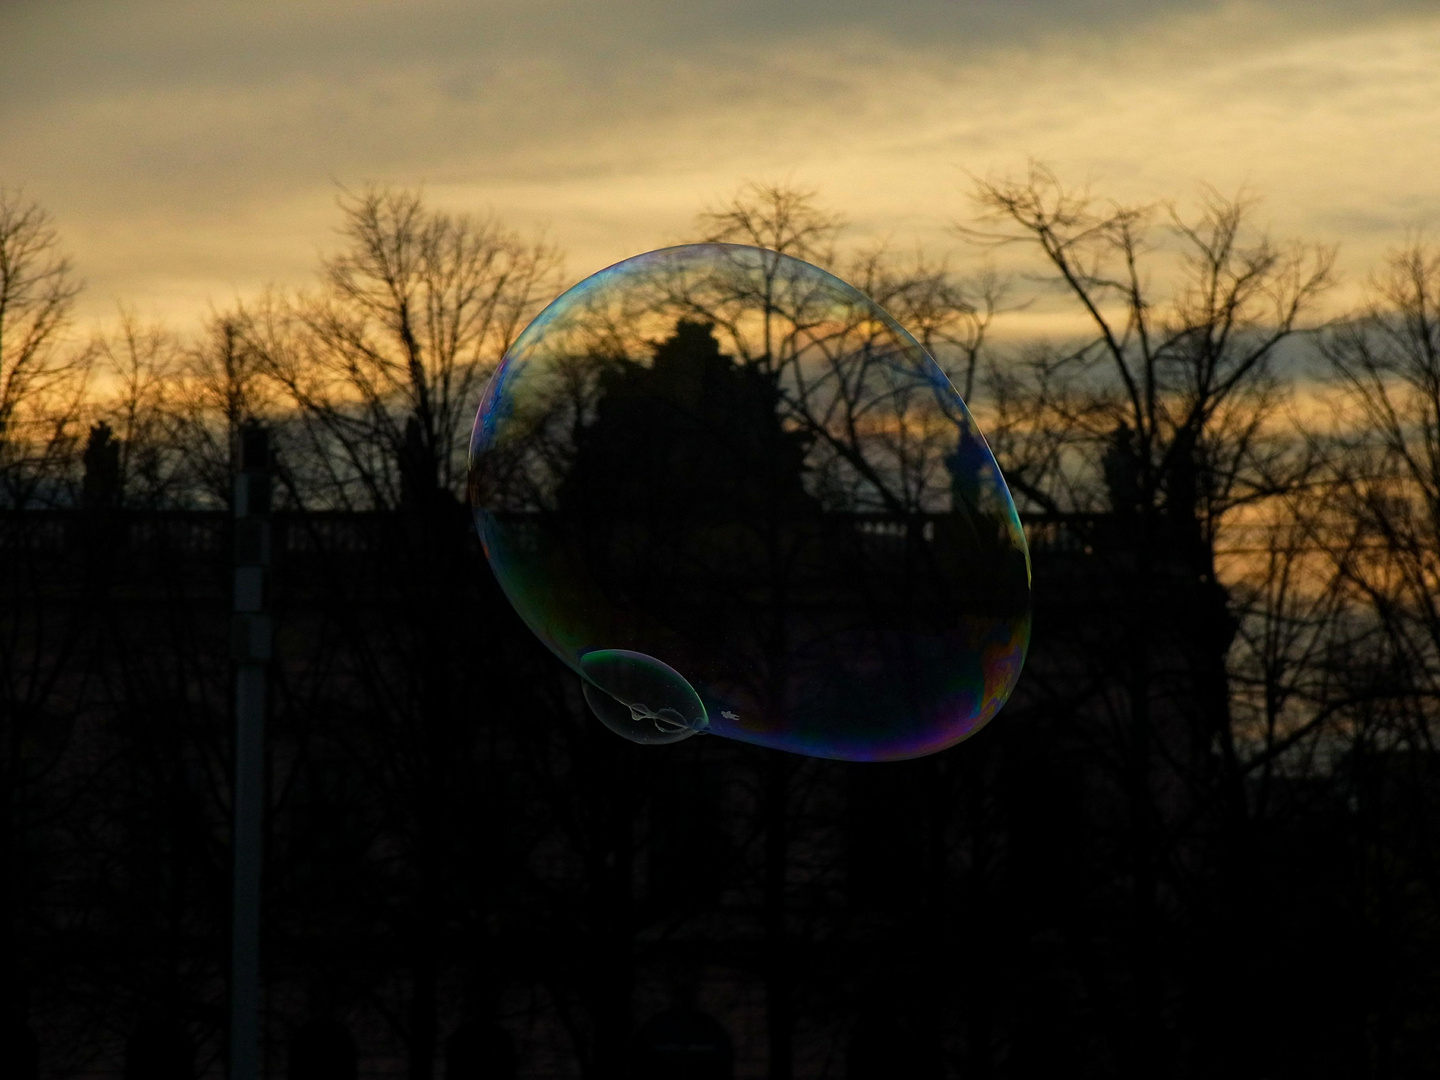 Sunset in the soap bubble